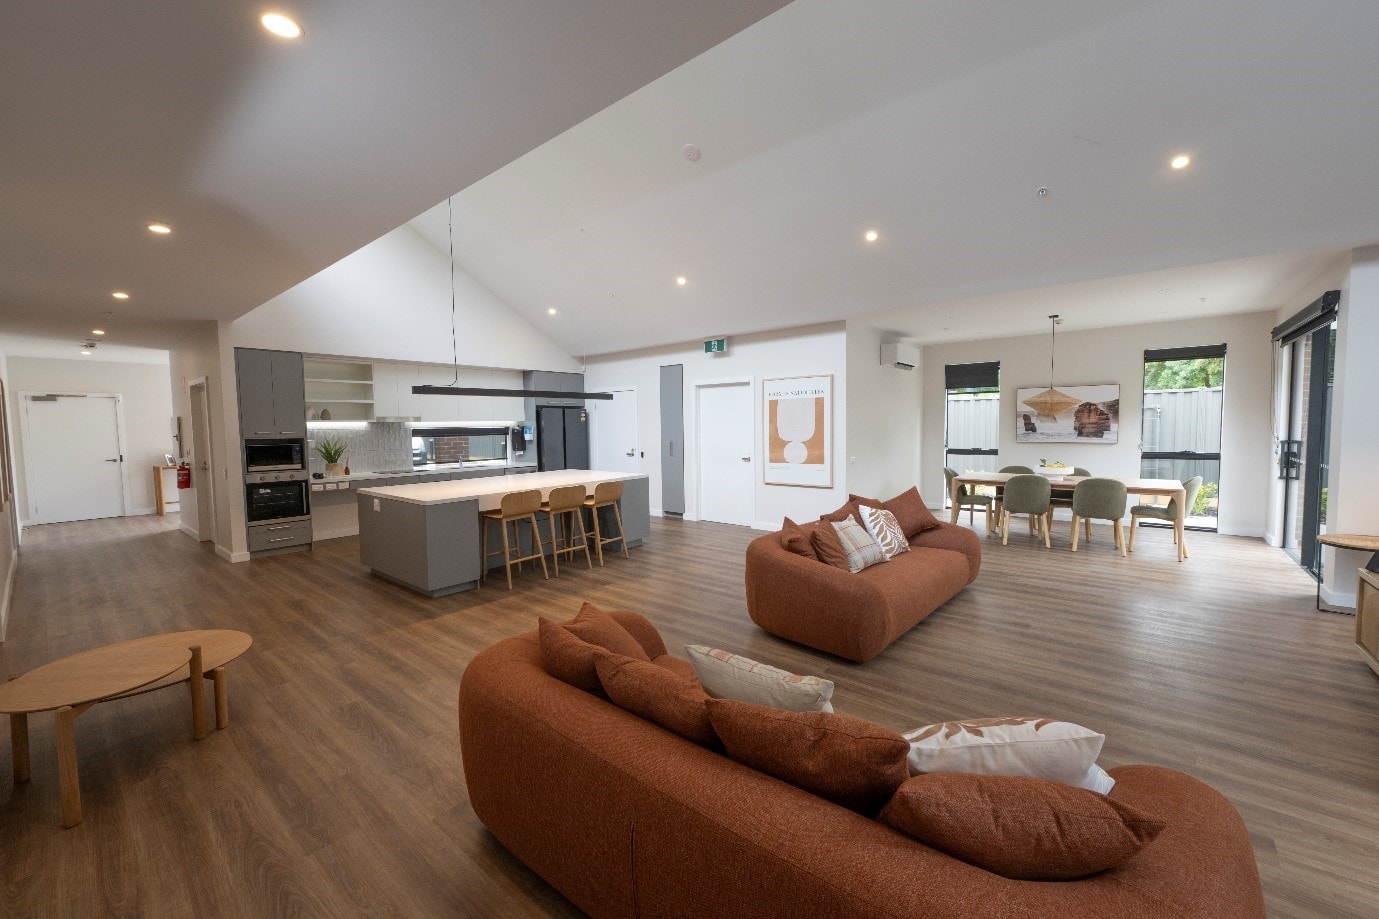 Open plan living area of Eltham house 2 with brown-orange couches in foreground, dining table with six chairs in the background and kitchen to the left.